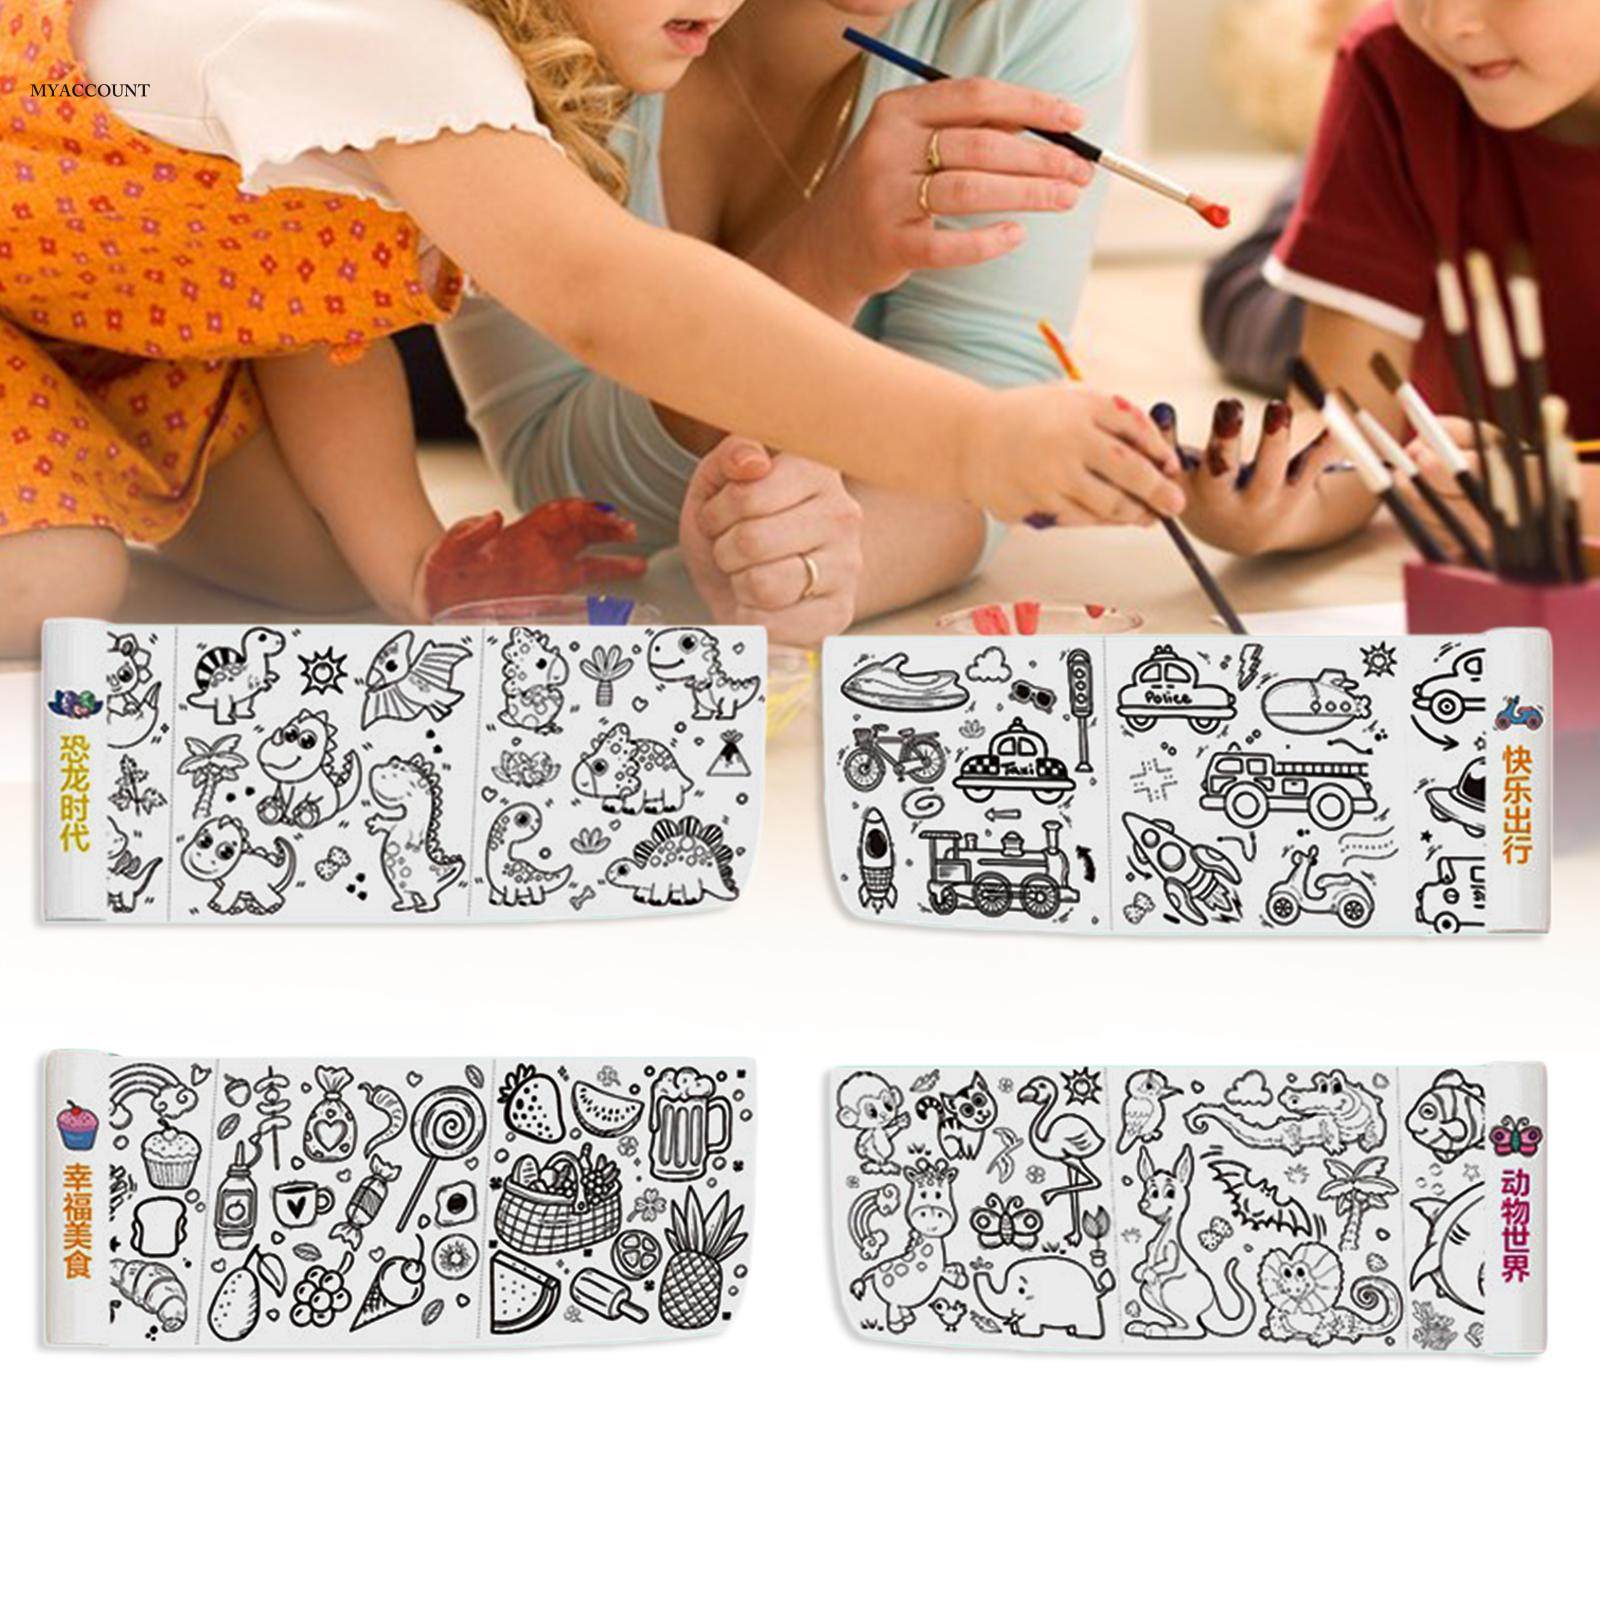 Colouring Drawing Roll Stickers - 120 Inches by Ifsha Mart - Online Shopping in Pakistan